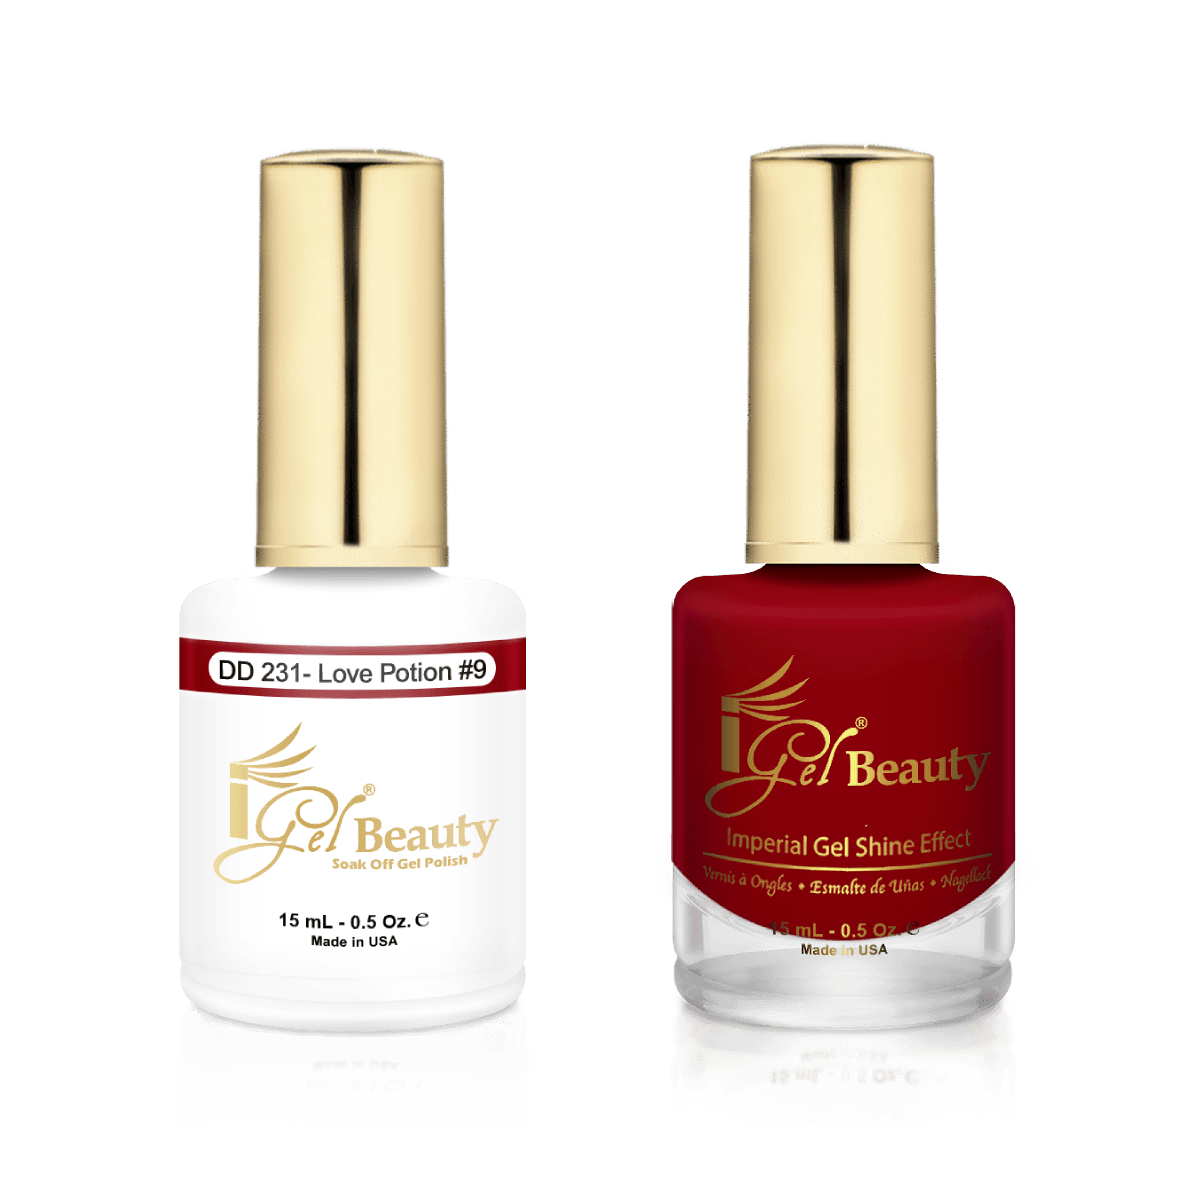 IGel Duo Gel Polish + Matching Nail Lacquer DD 231 LOVE POTION #9